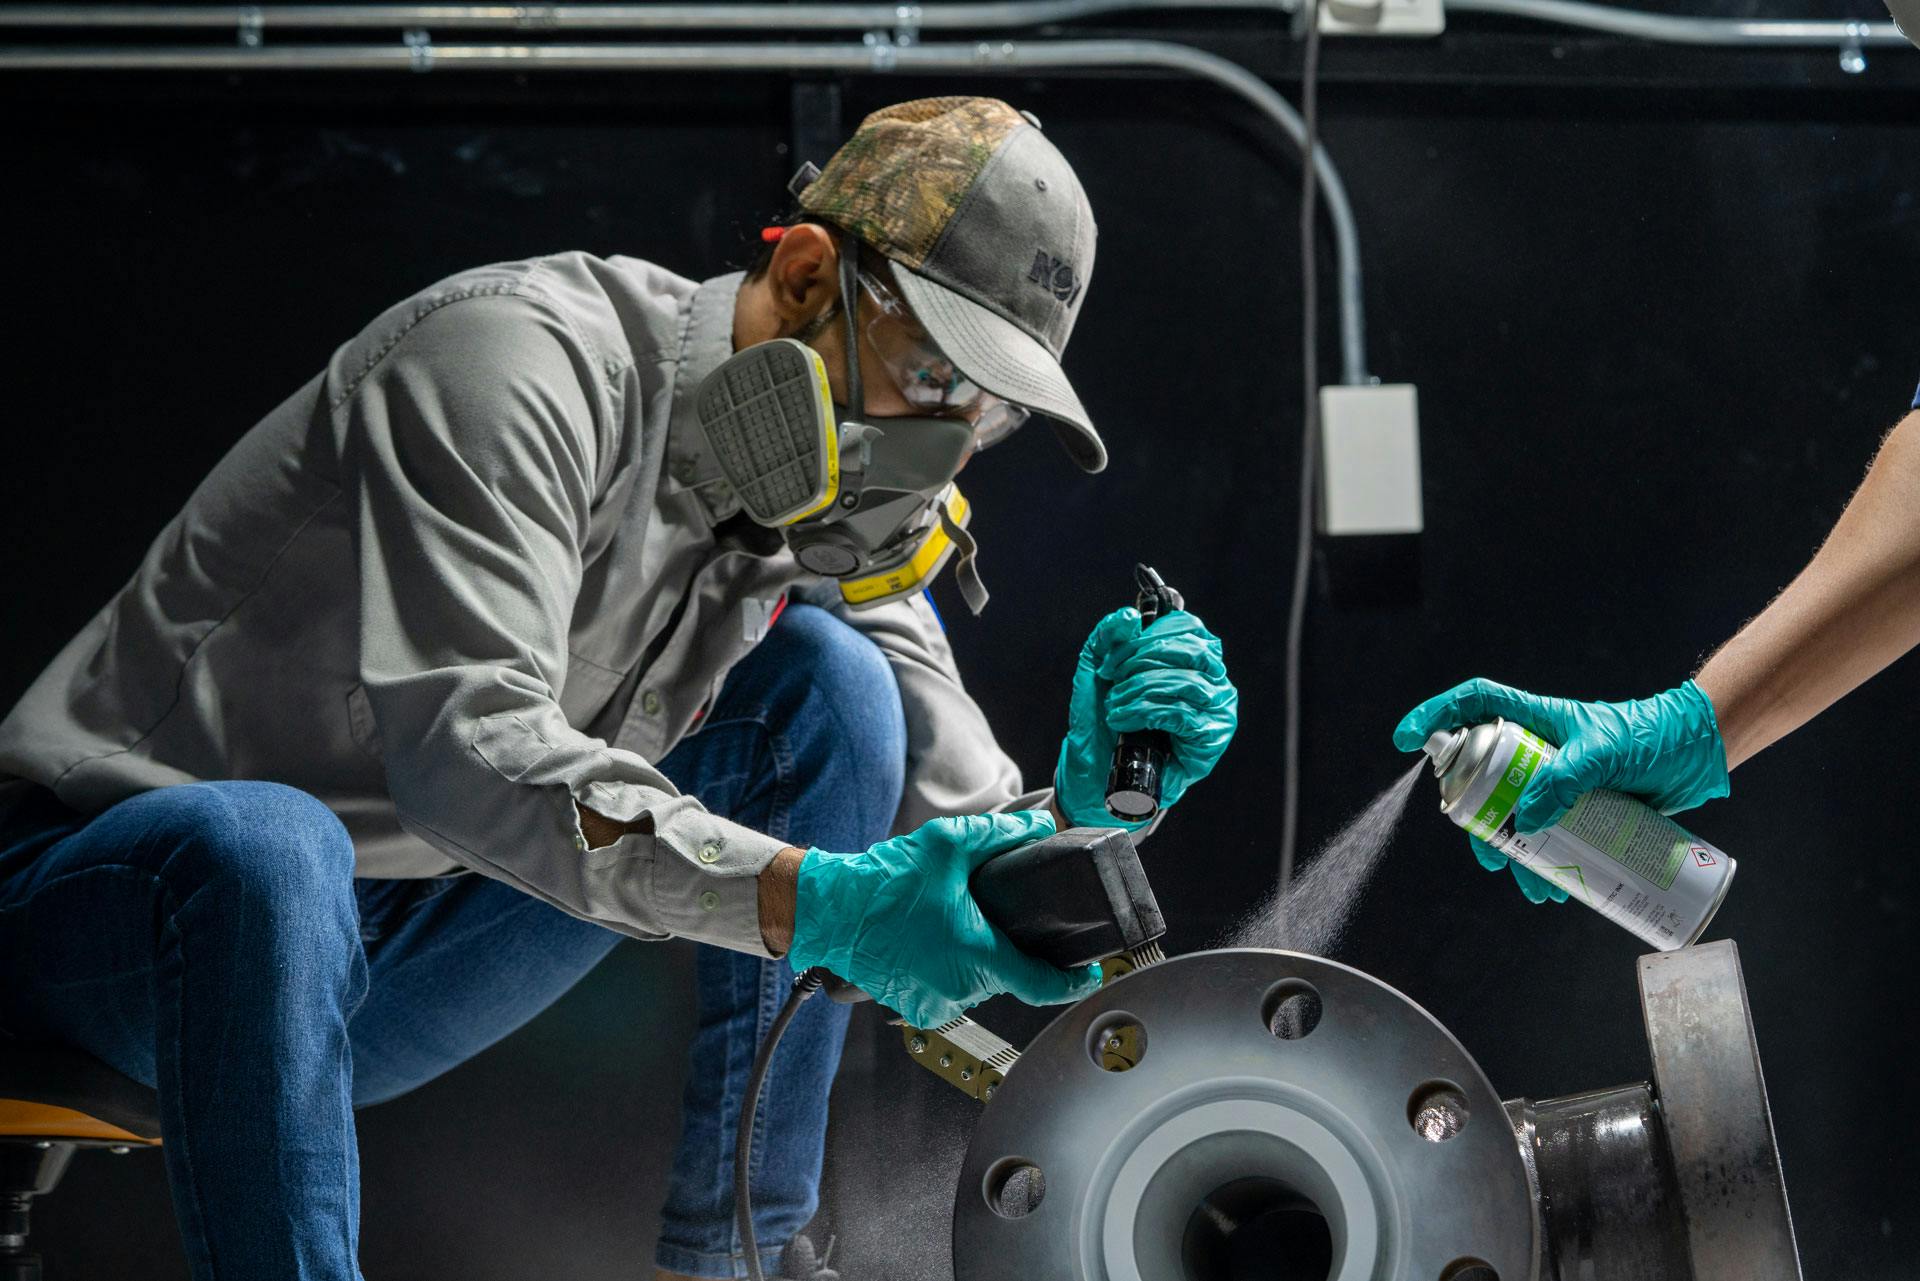 NOV employee wearing PPE while painting equipment, with a hand entering the shot with a spray can